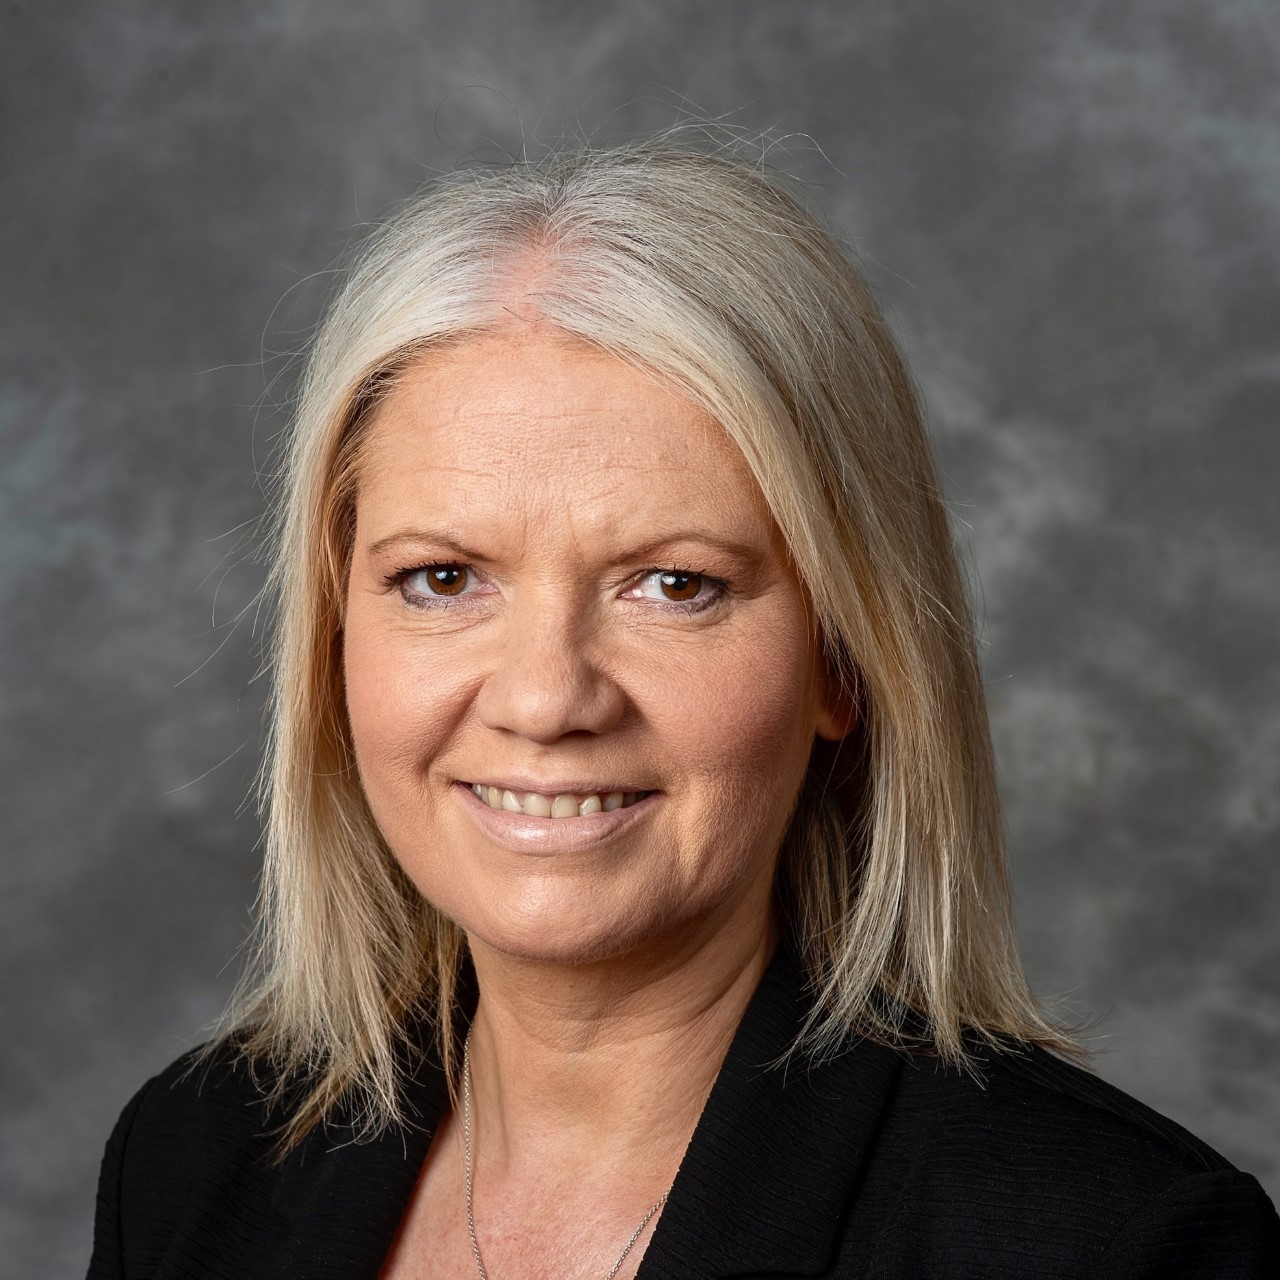 A new Chief Executive for Pendle Council